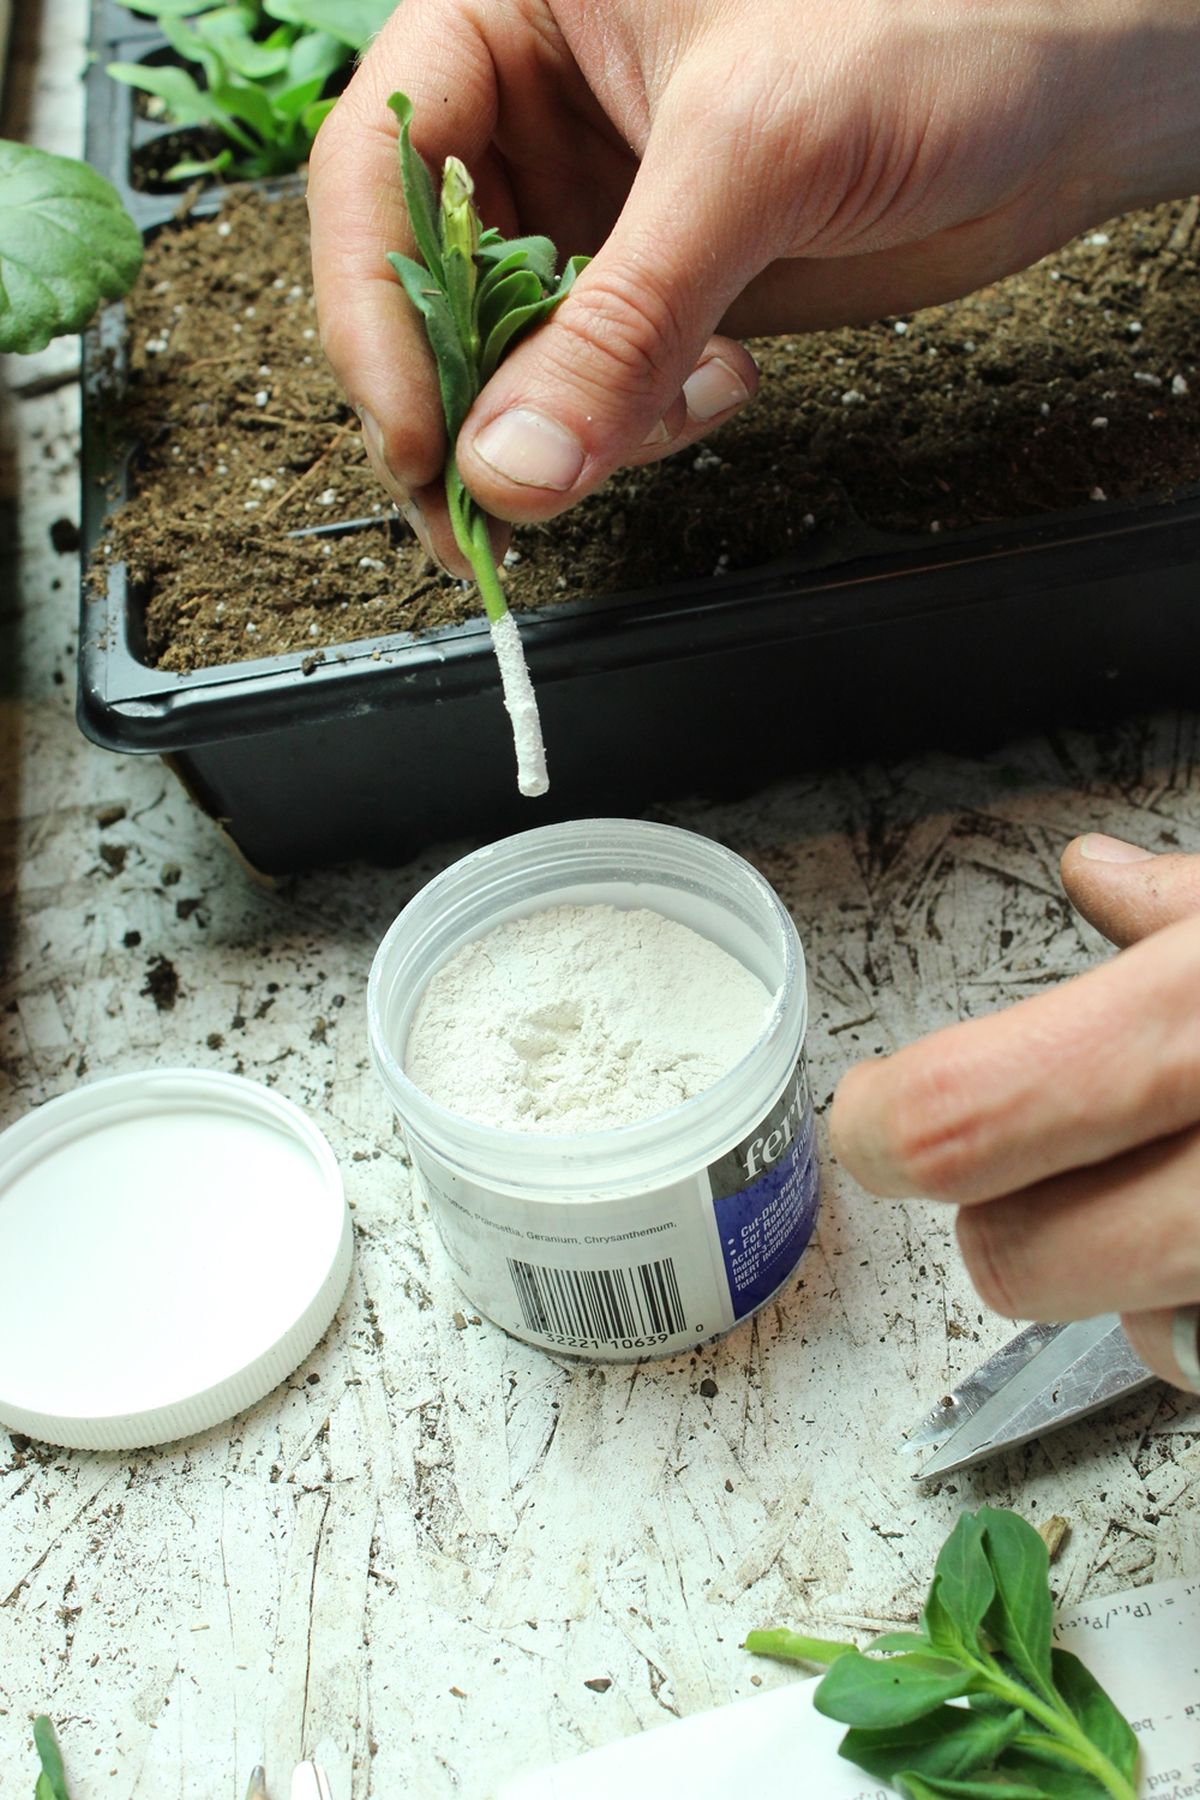 DIY Flower Bed Starts-cutting in the rooting powder